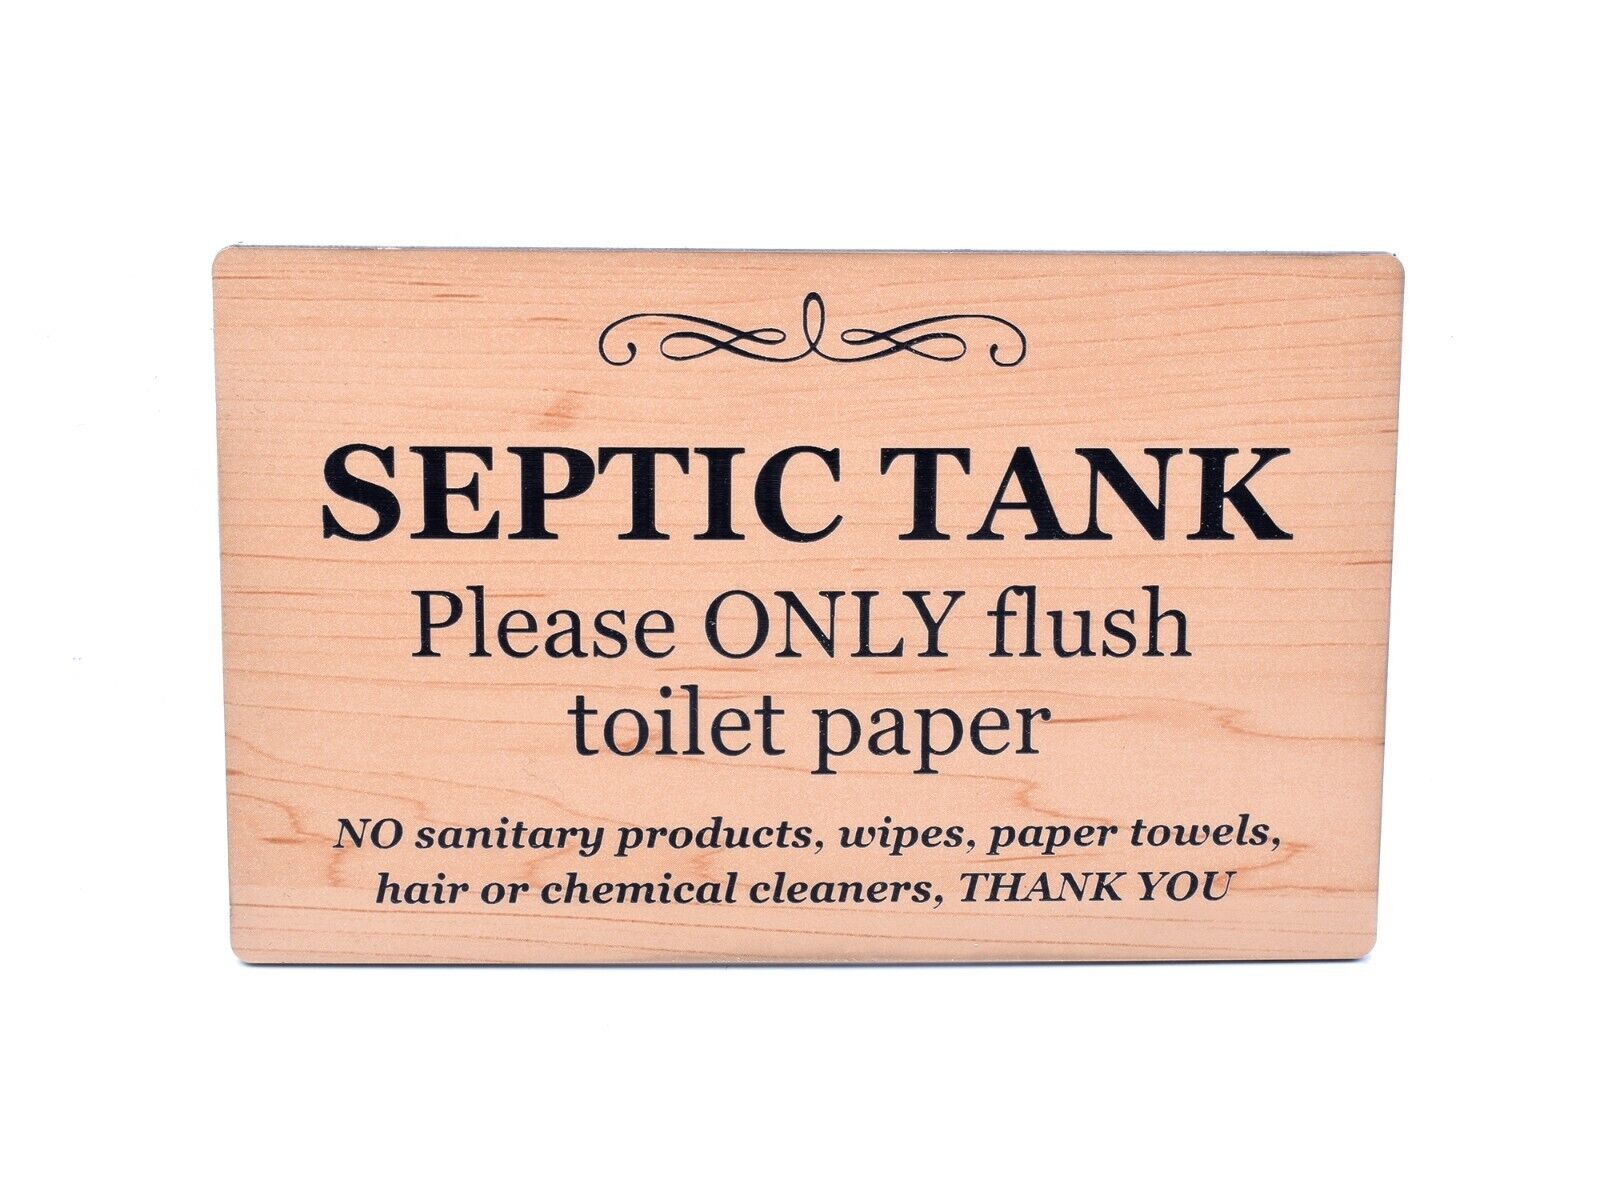 Septic Tank Adhesive Factory outlet Sign - Stylish for Plaque Toil Wood Effect Latest item